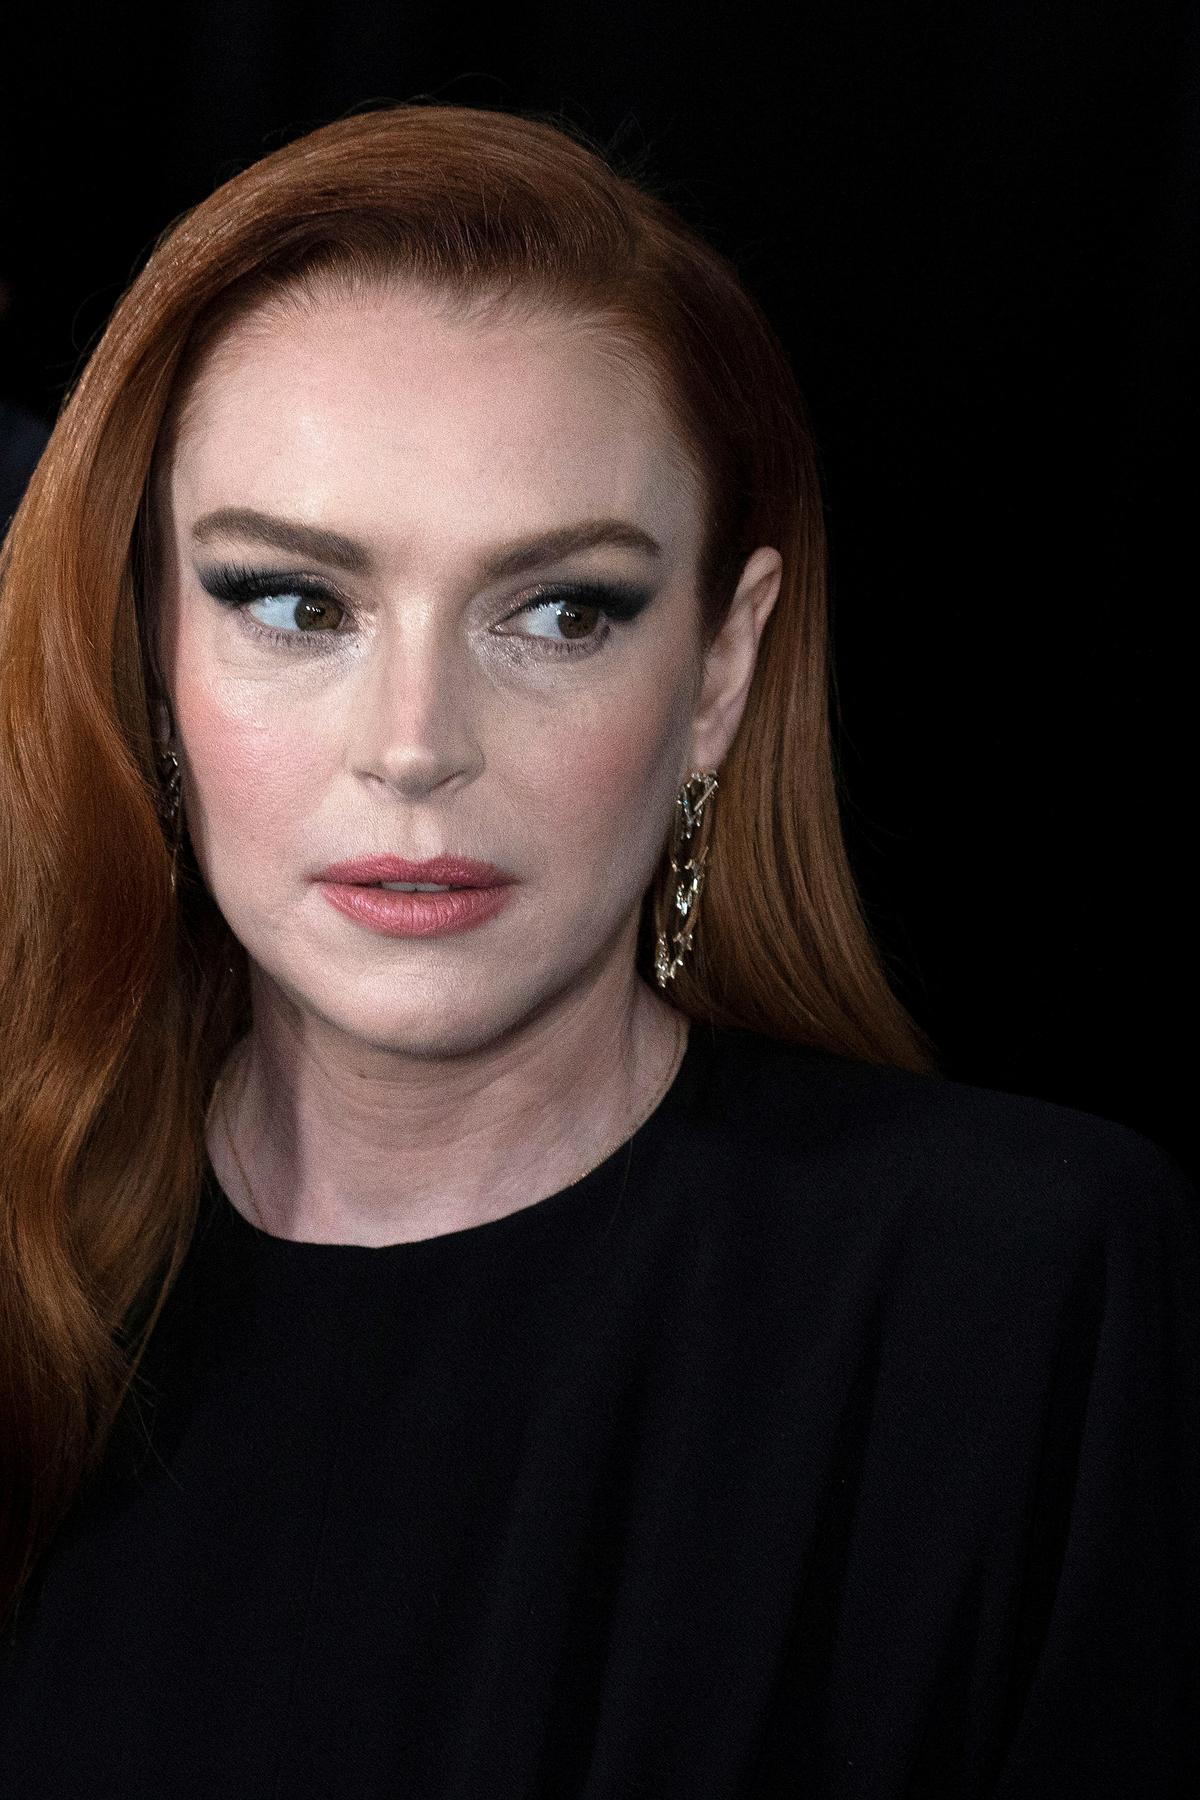 Lindsay Lohan To Star In 'Our Little Secret' Movie For Netflix